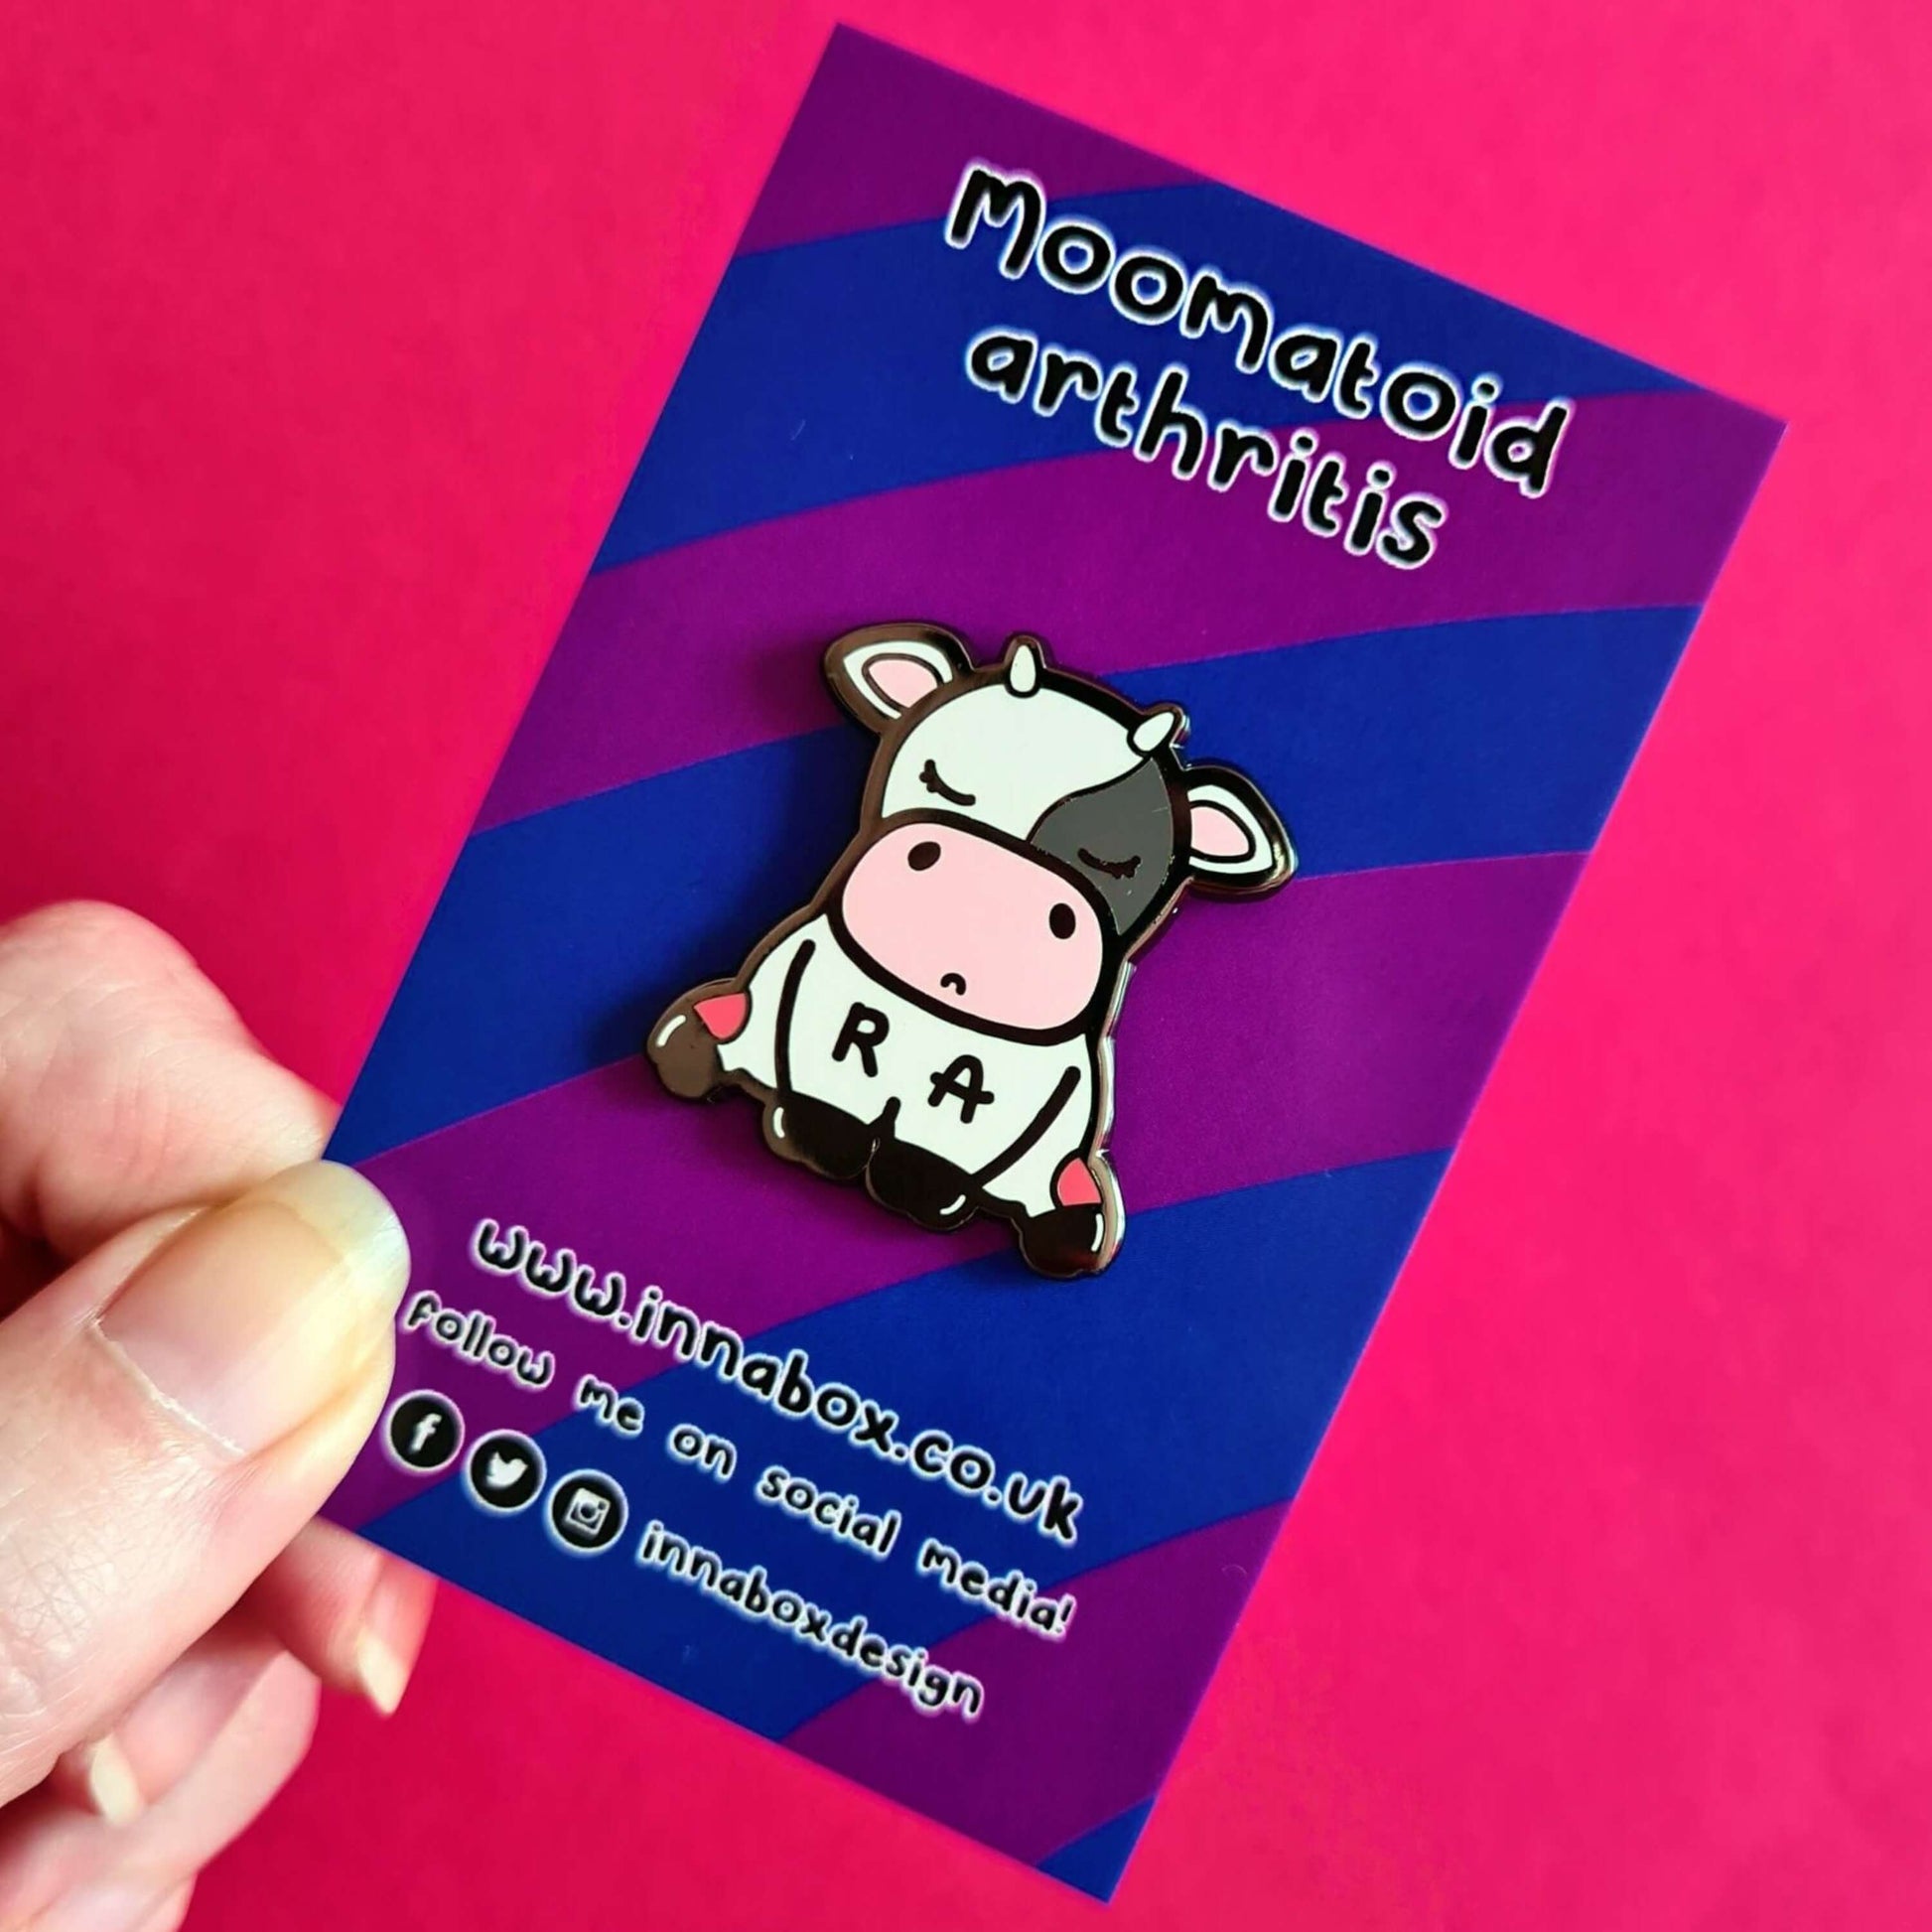 The Moomatoid Arthritis Cow Enamel Pin - Rheumatoid Arthritis on purple and blue stripe backing card held over a red background. The sad cow shape pin has red marks on its lower back legs and the initials R and A across its middle. The hand drawn design is raising awareness for Rheumatoid Arthritis.